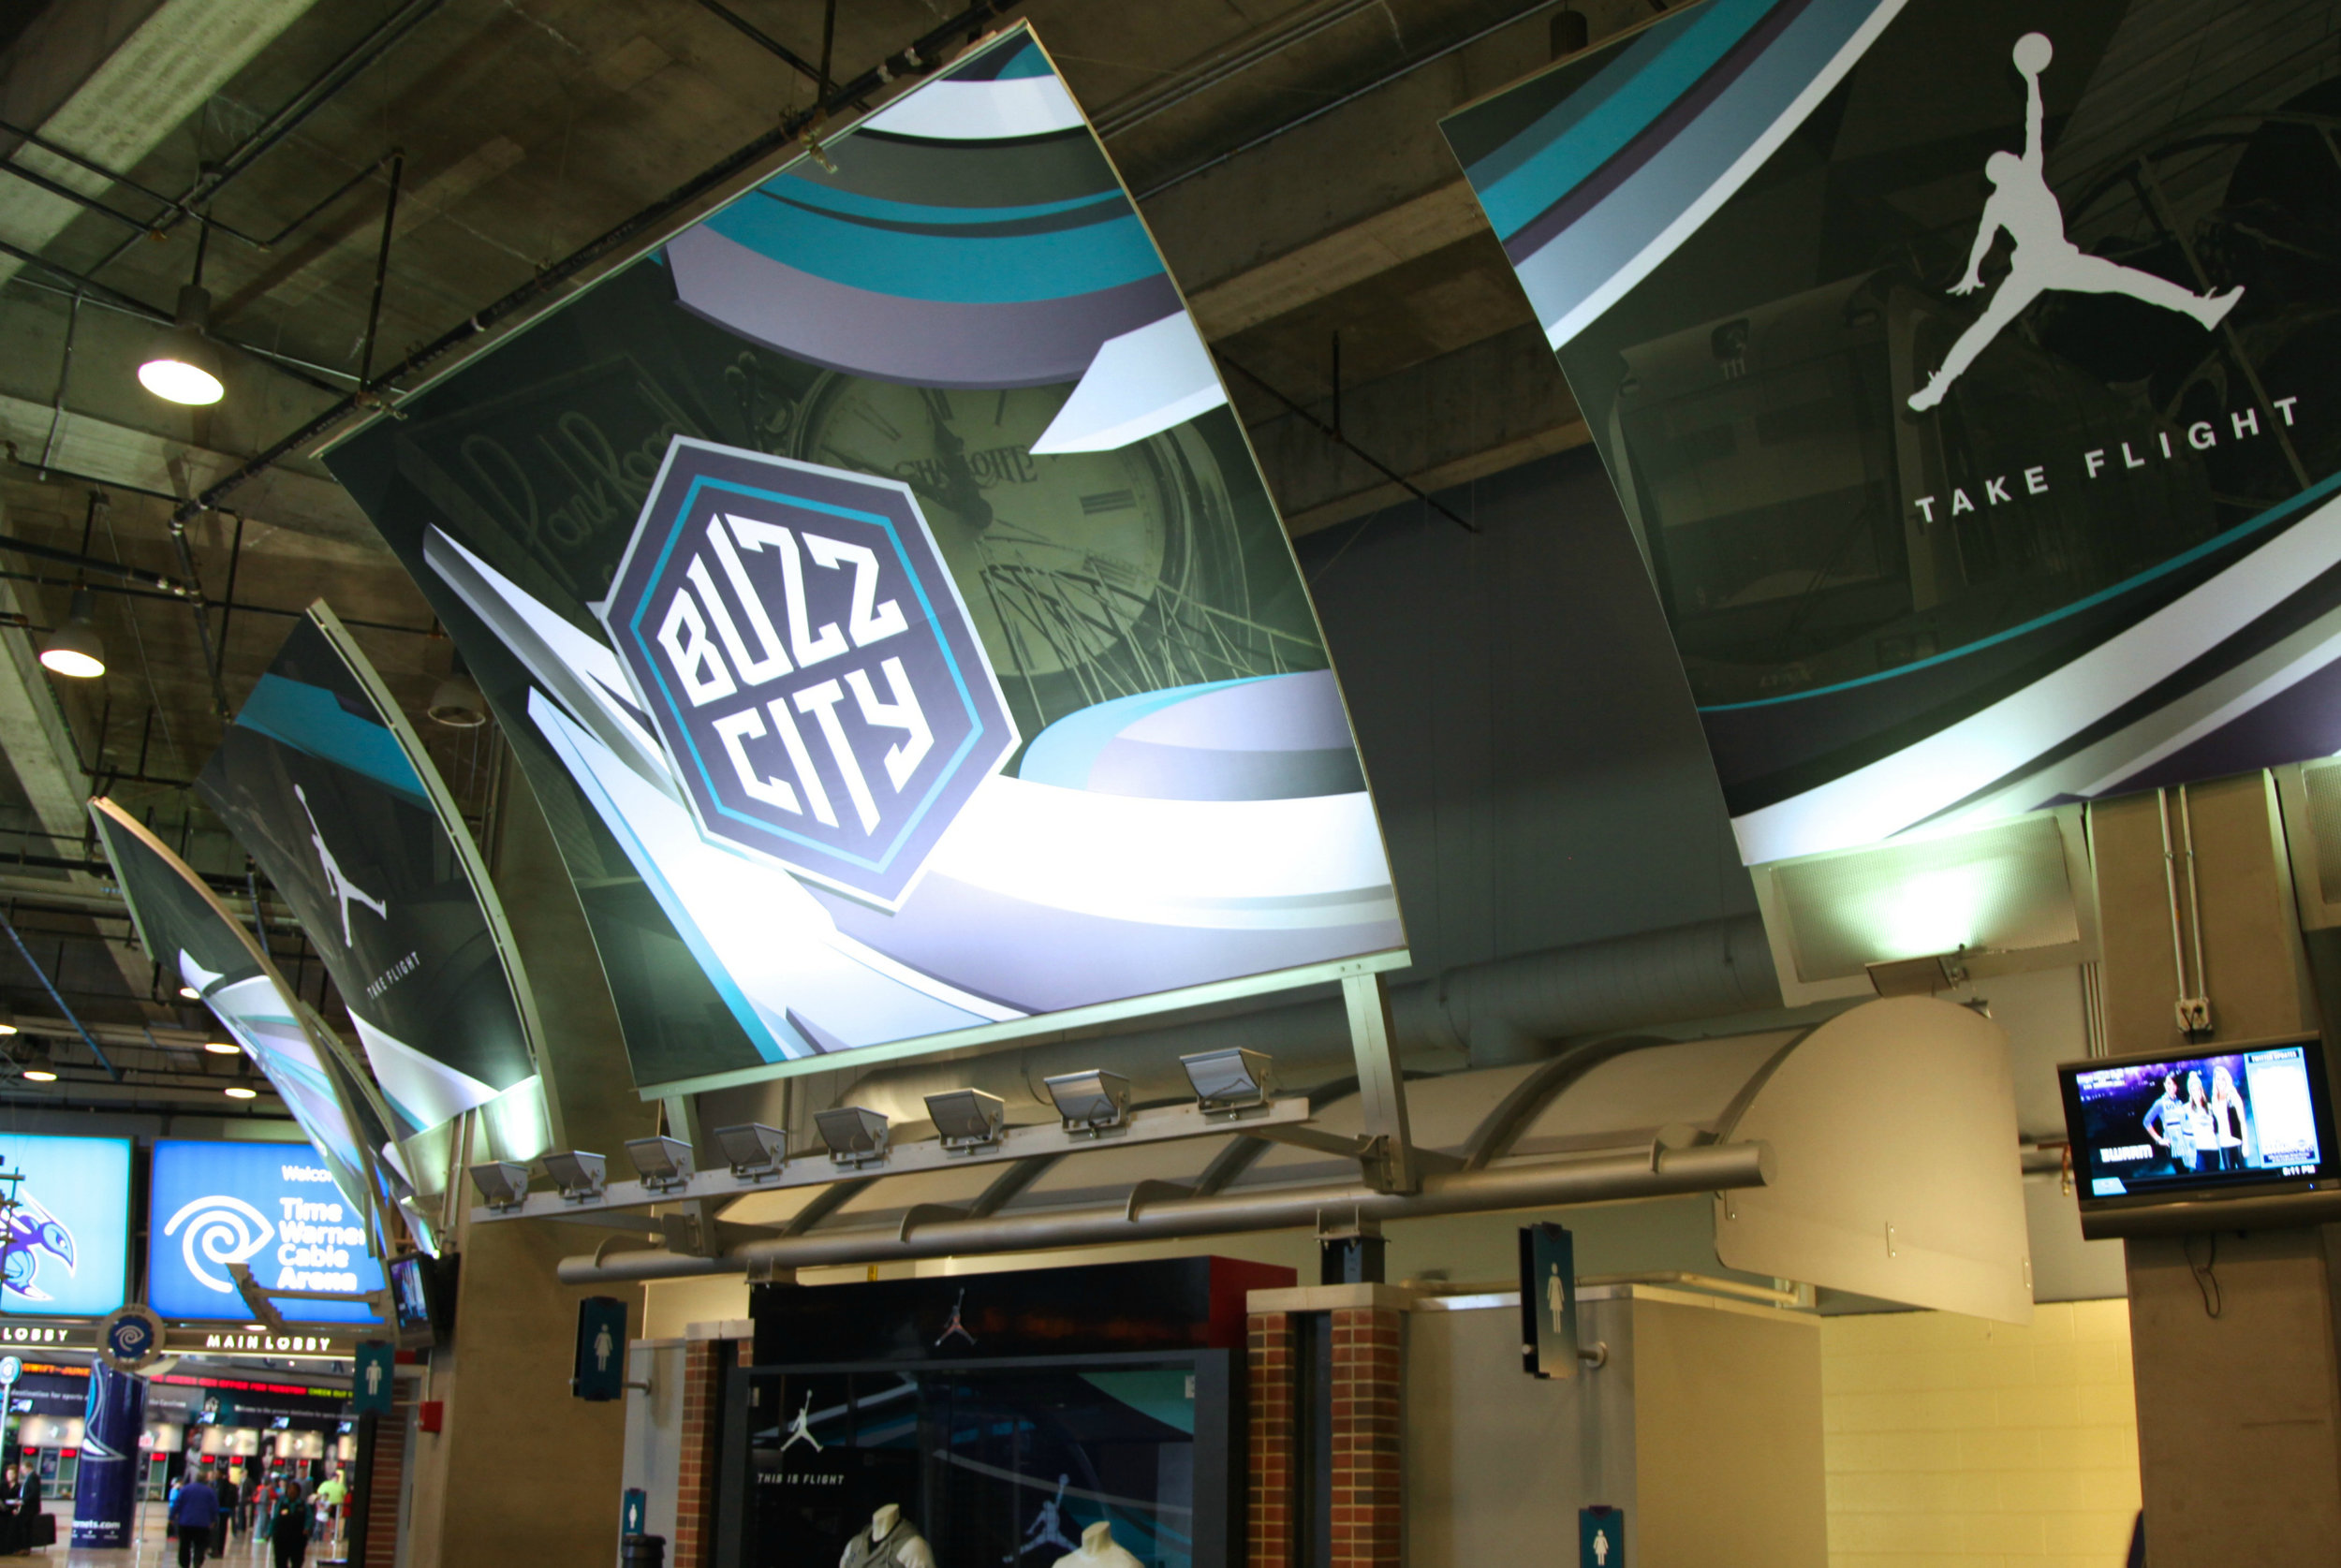 Hornets_Curved_Ceiling_Buzz_City_3.jpg